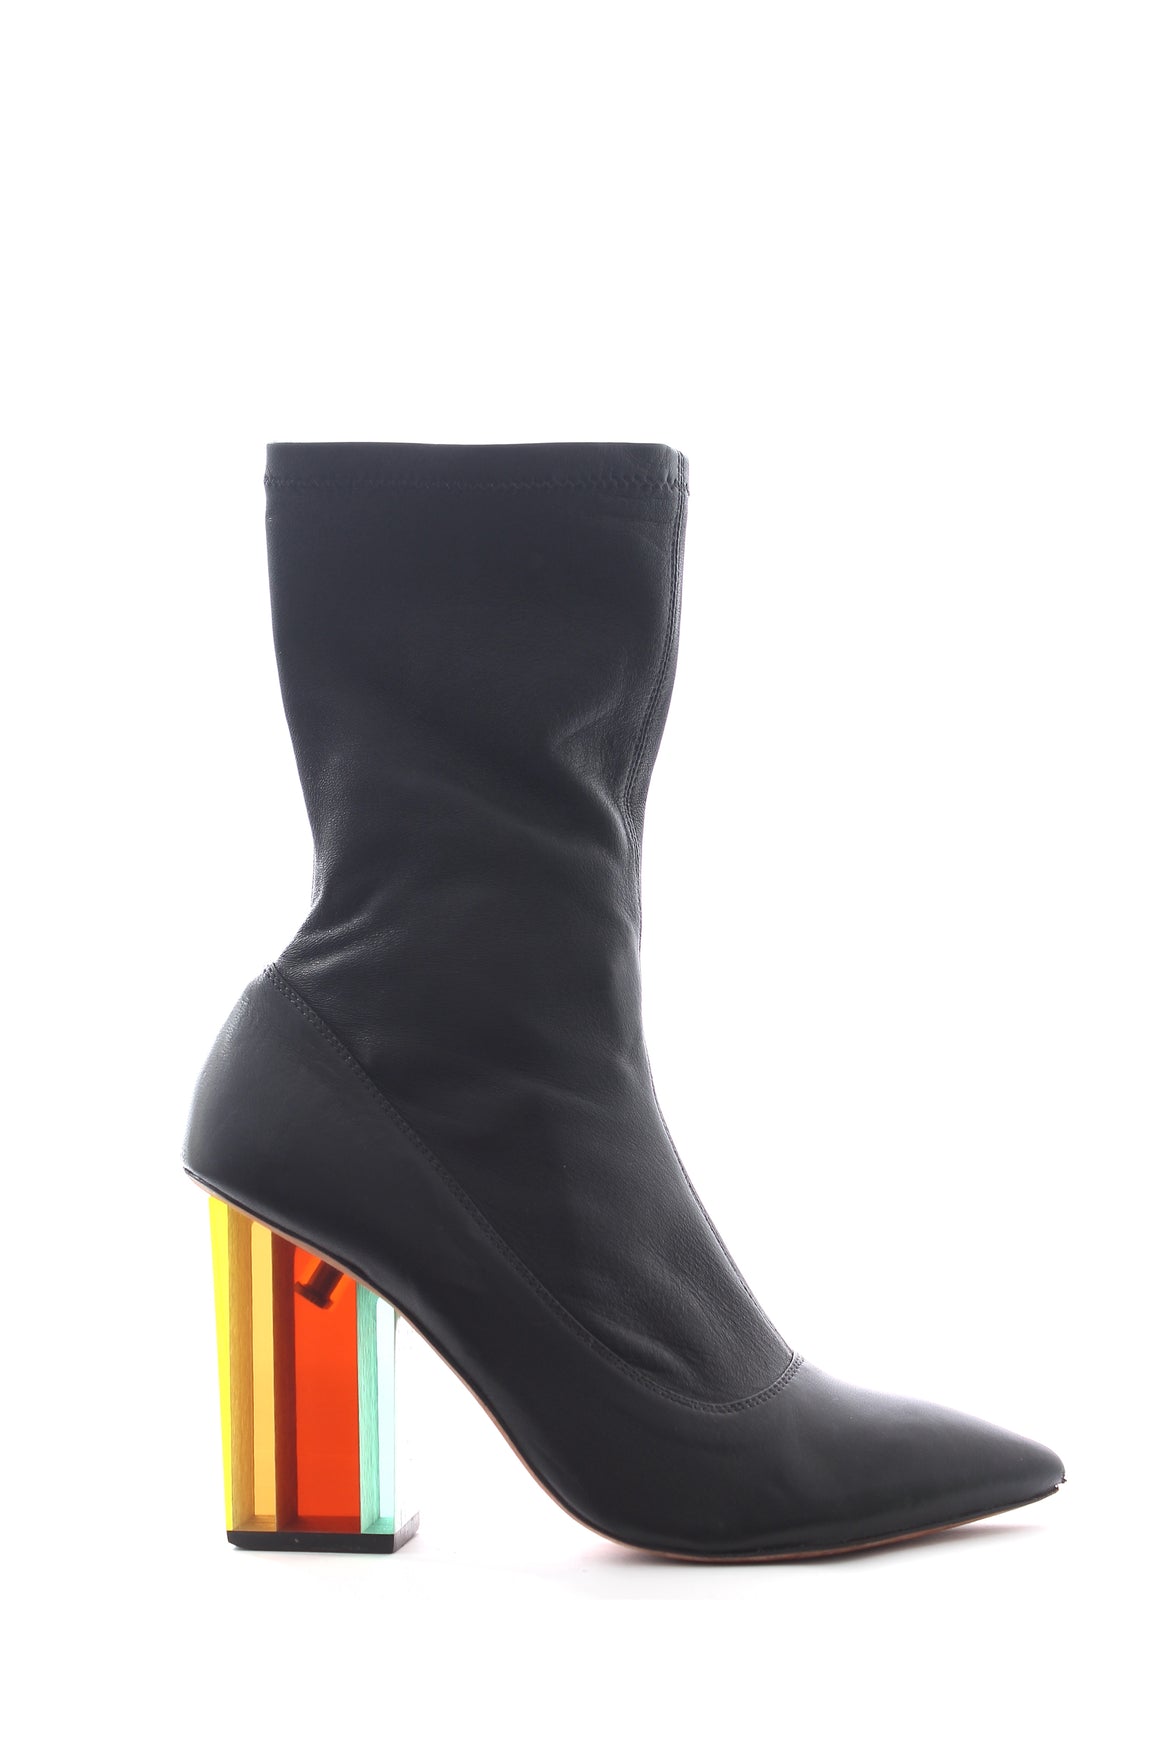 Zimmermann Stretch Leather Ankle Boots